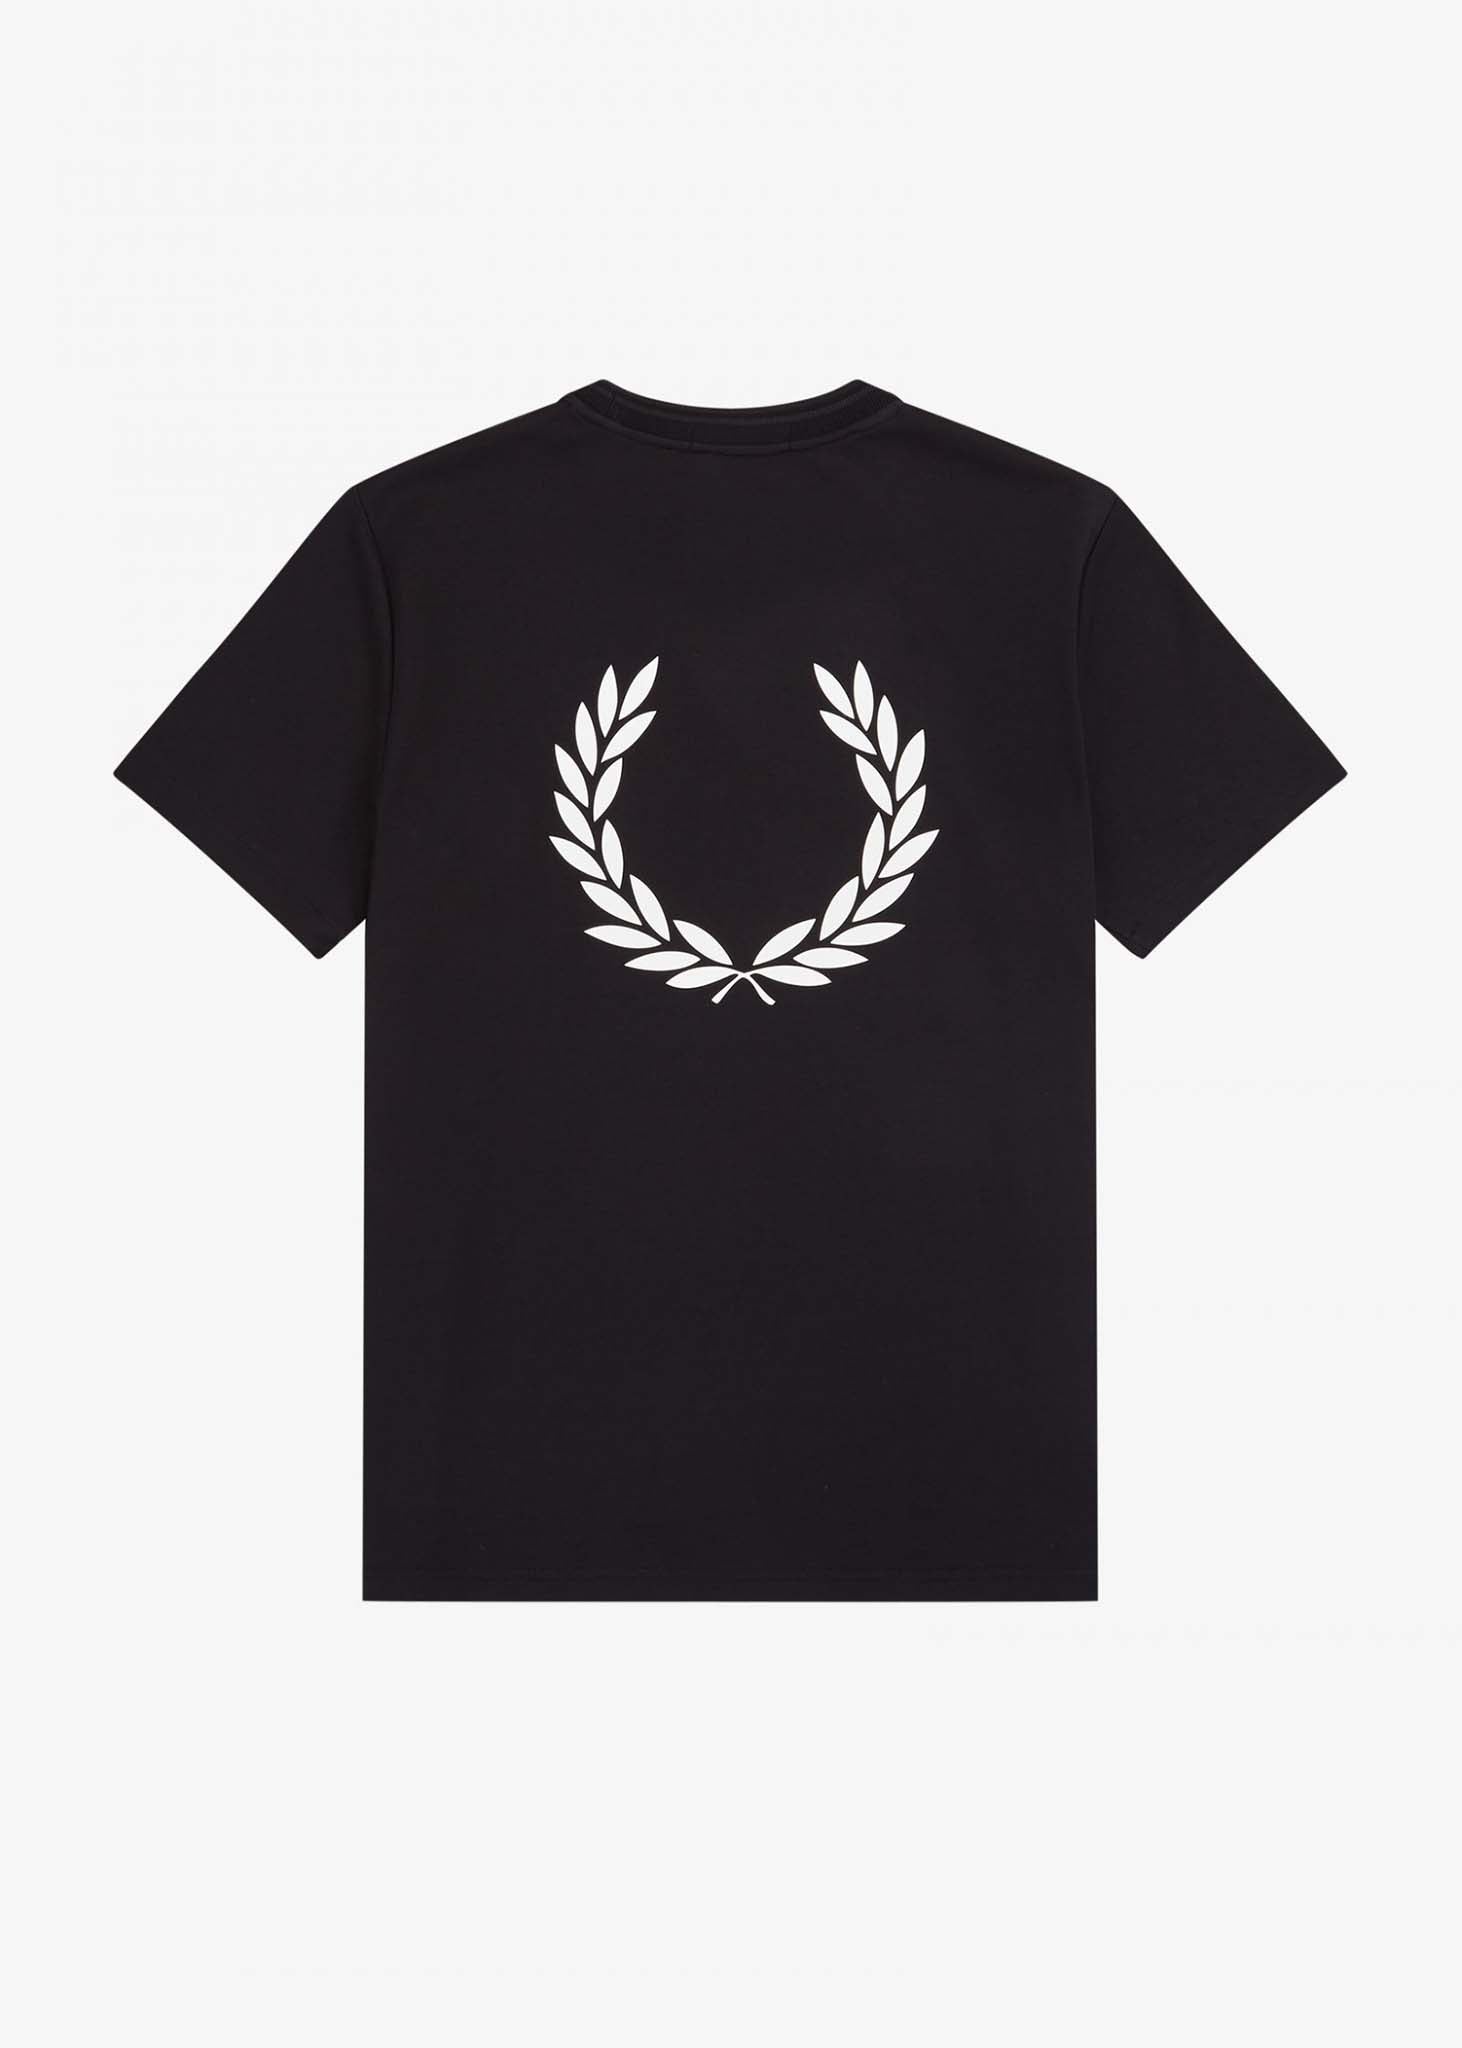 Fred Perry T-shirts  Laurel wreath t-shirt - black 